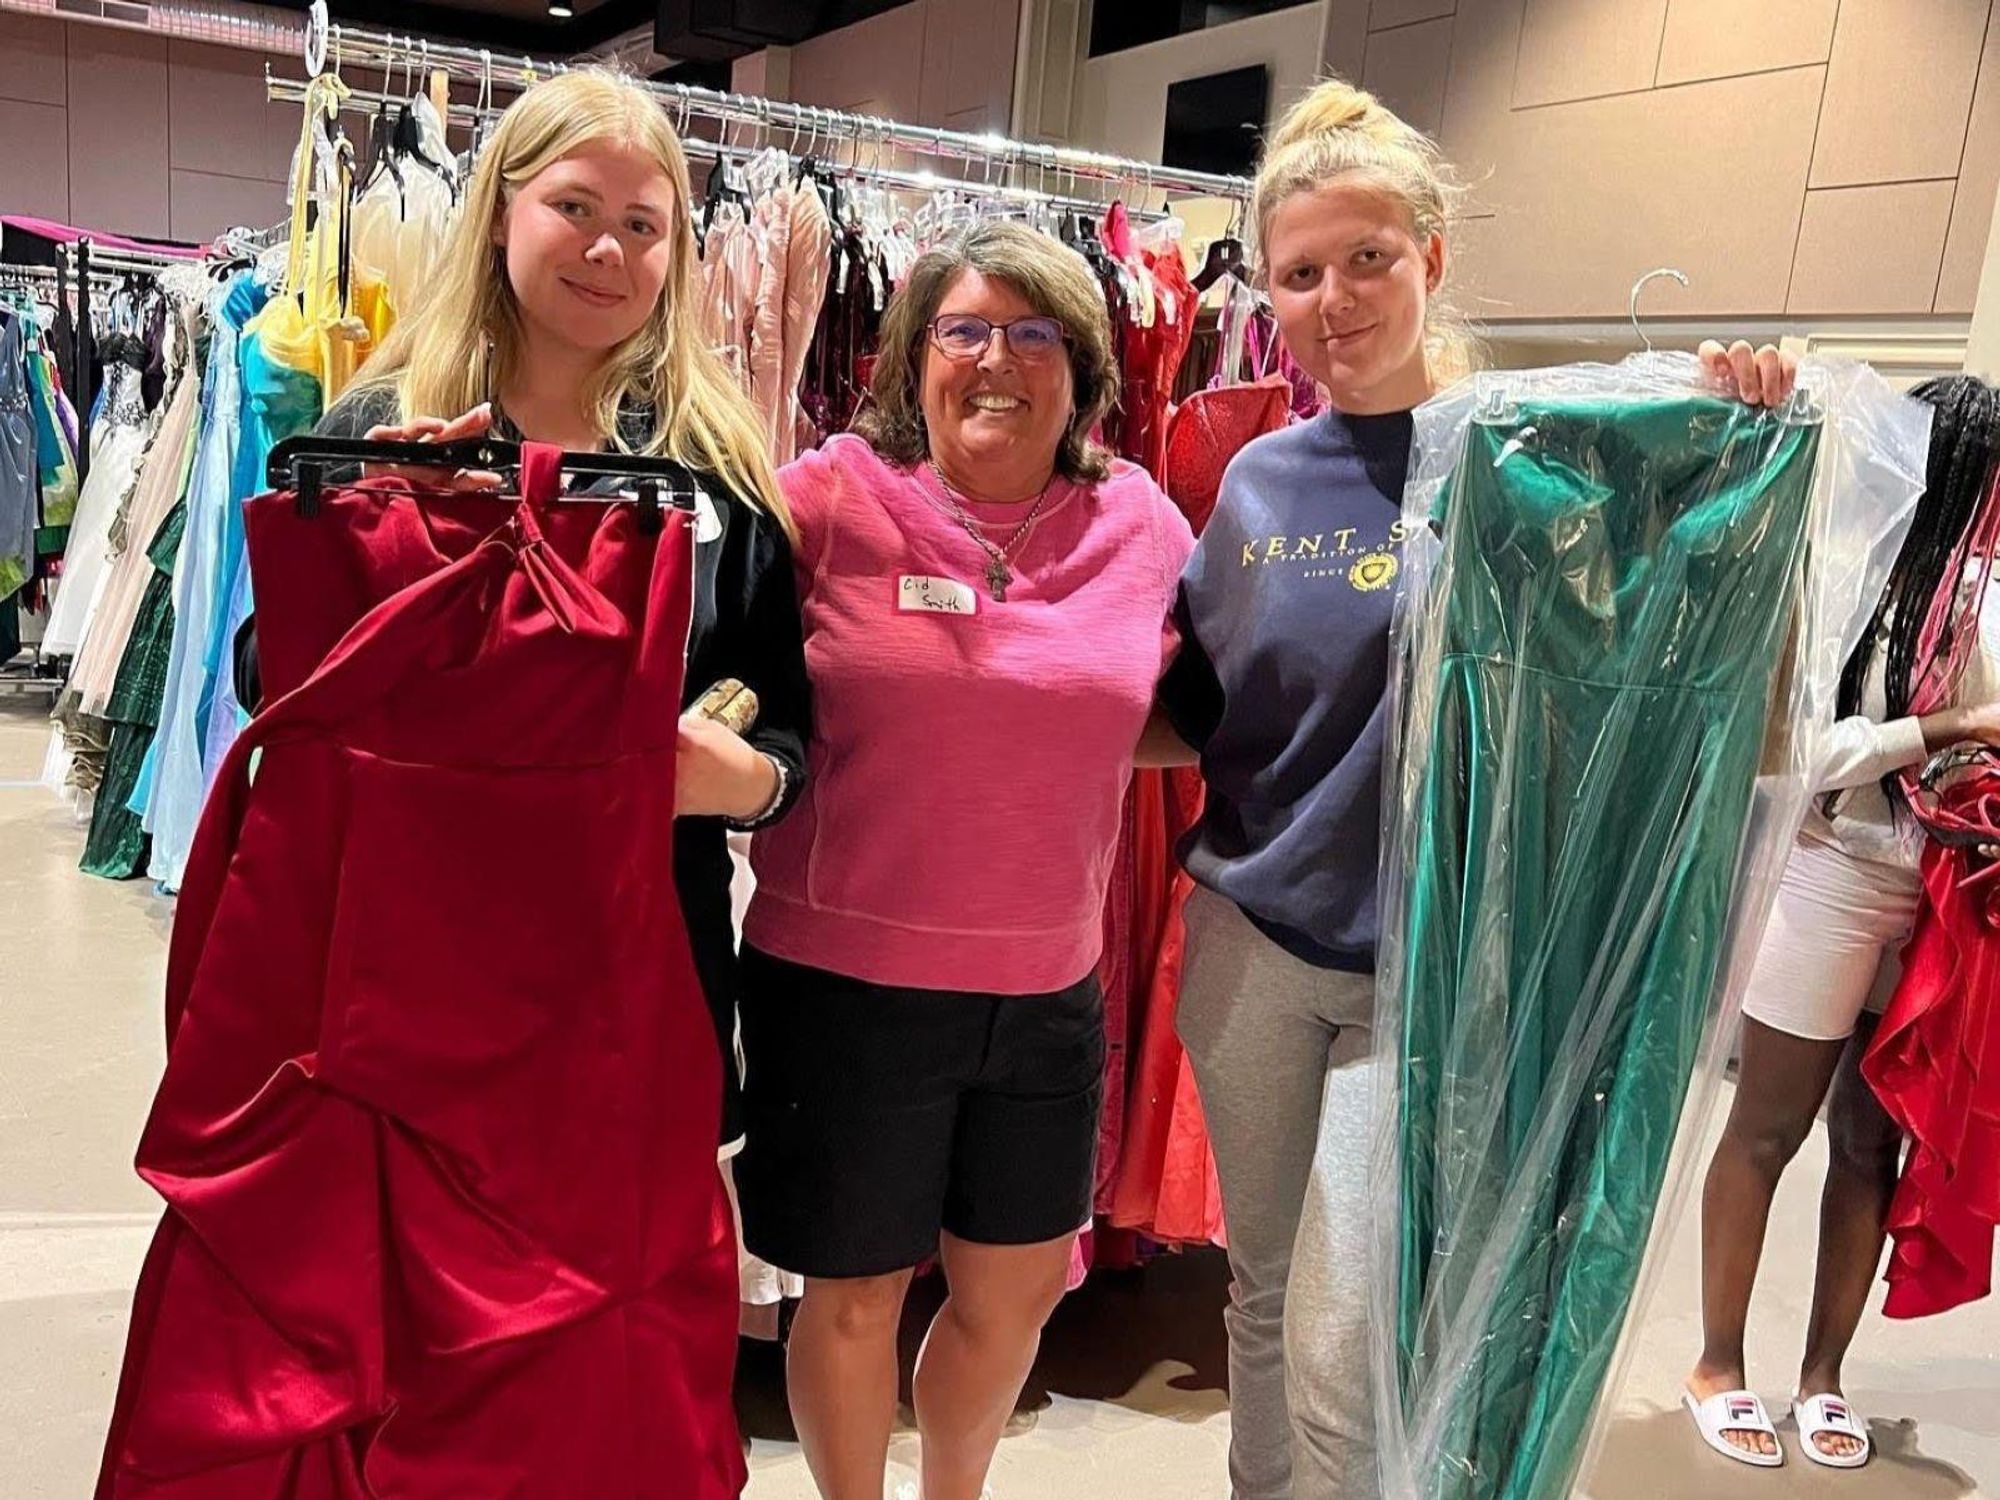 Plano Prom Closet opens doors to thousands of dresses for